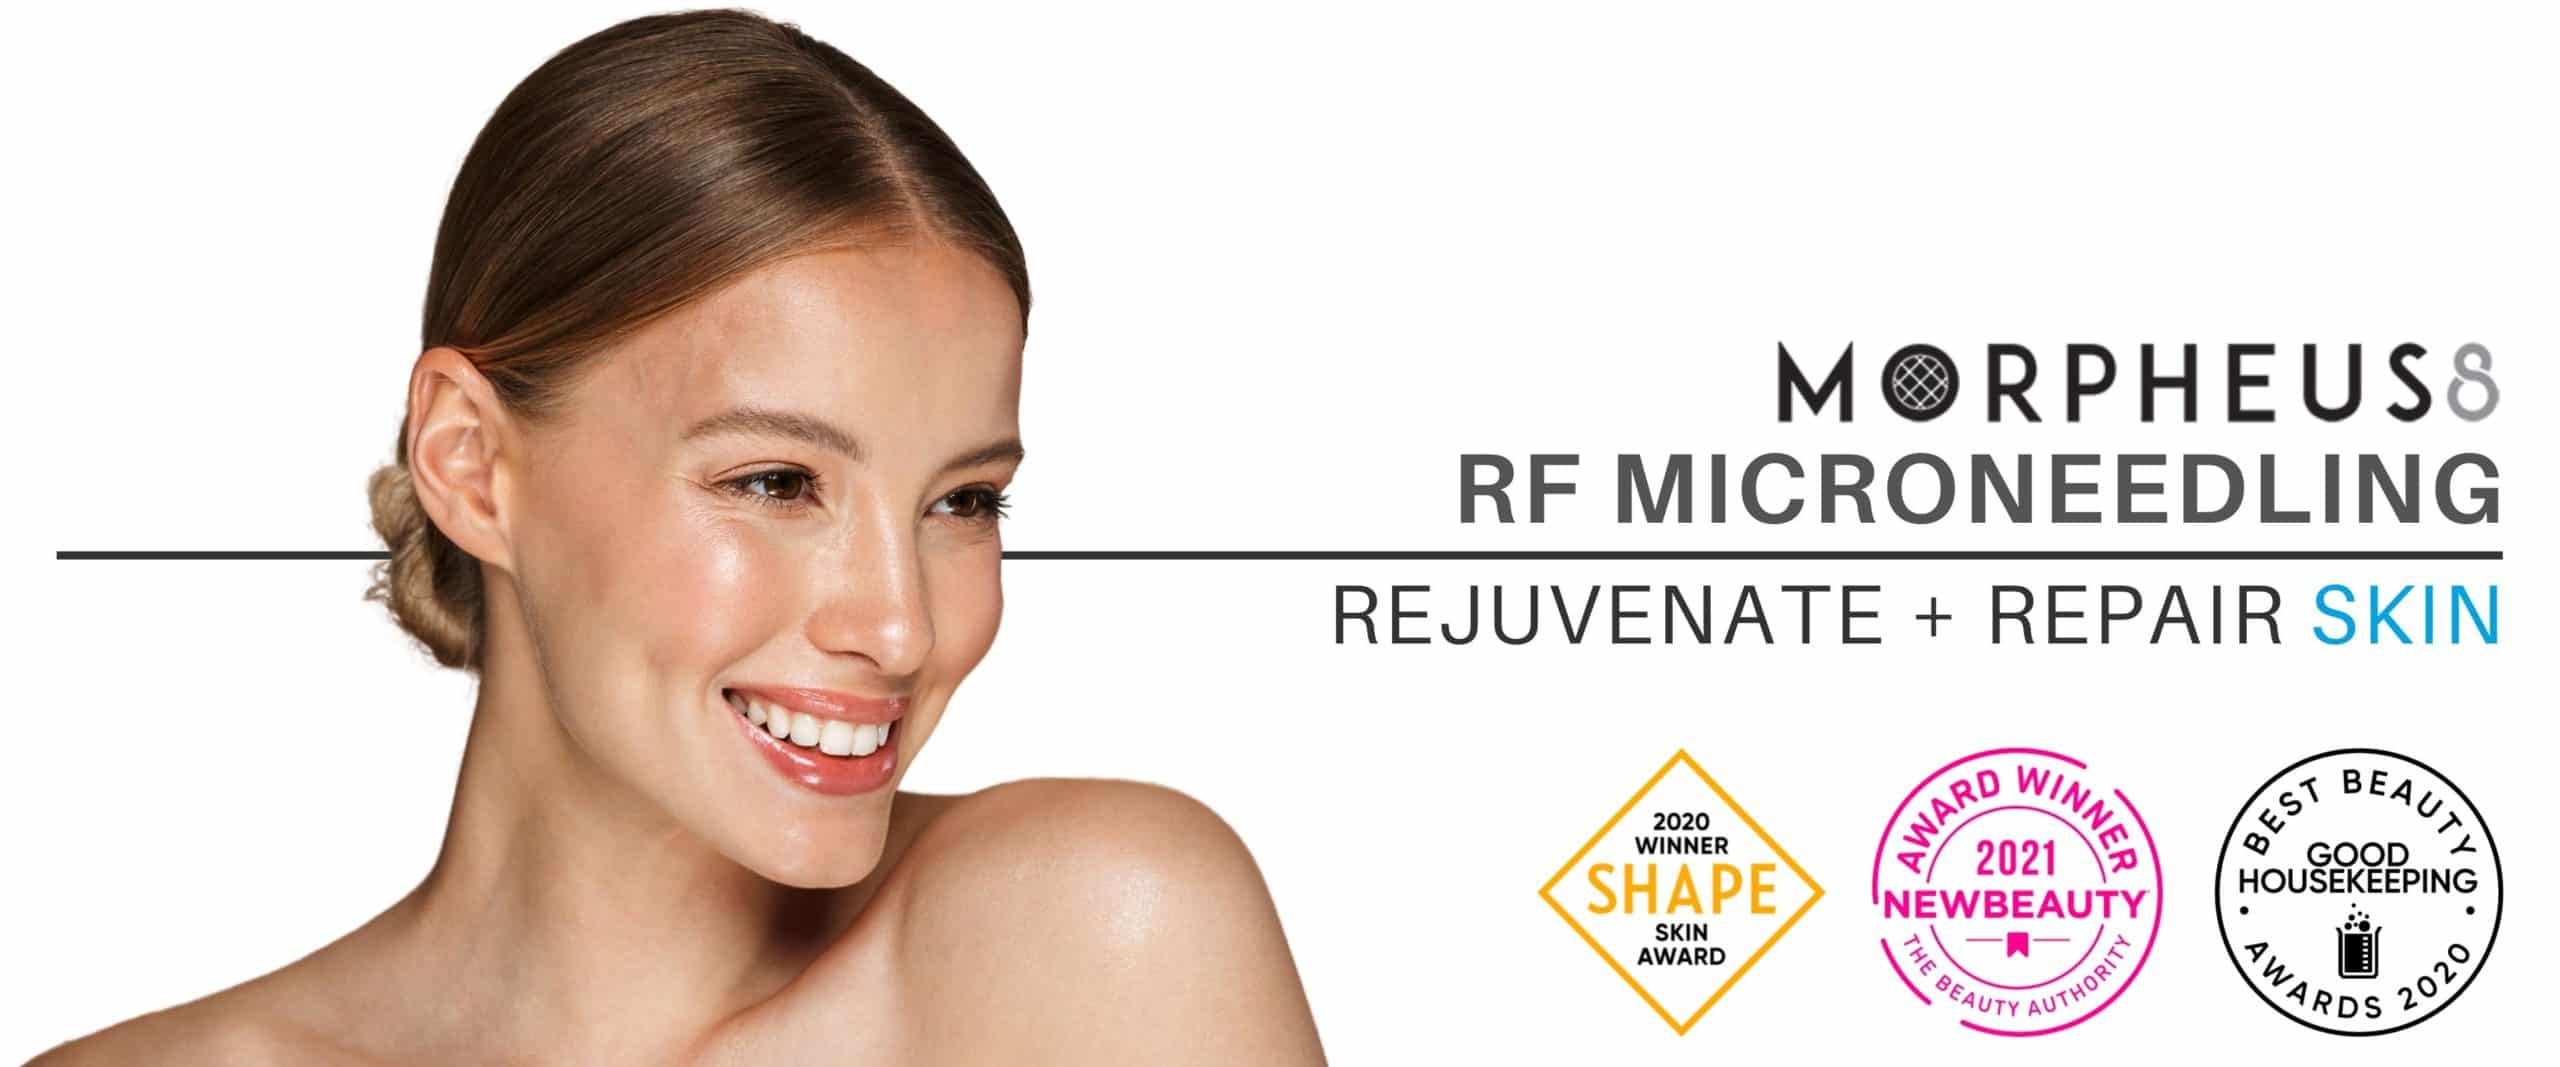 woman with a clear face promoting RF Microneedling with Morpheus8 treatment